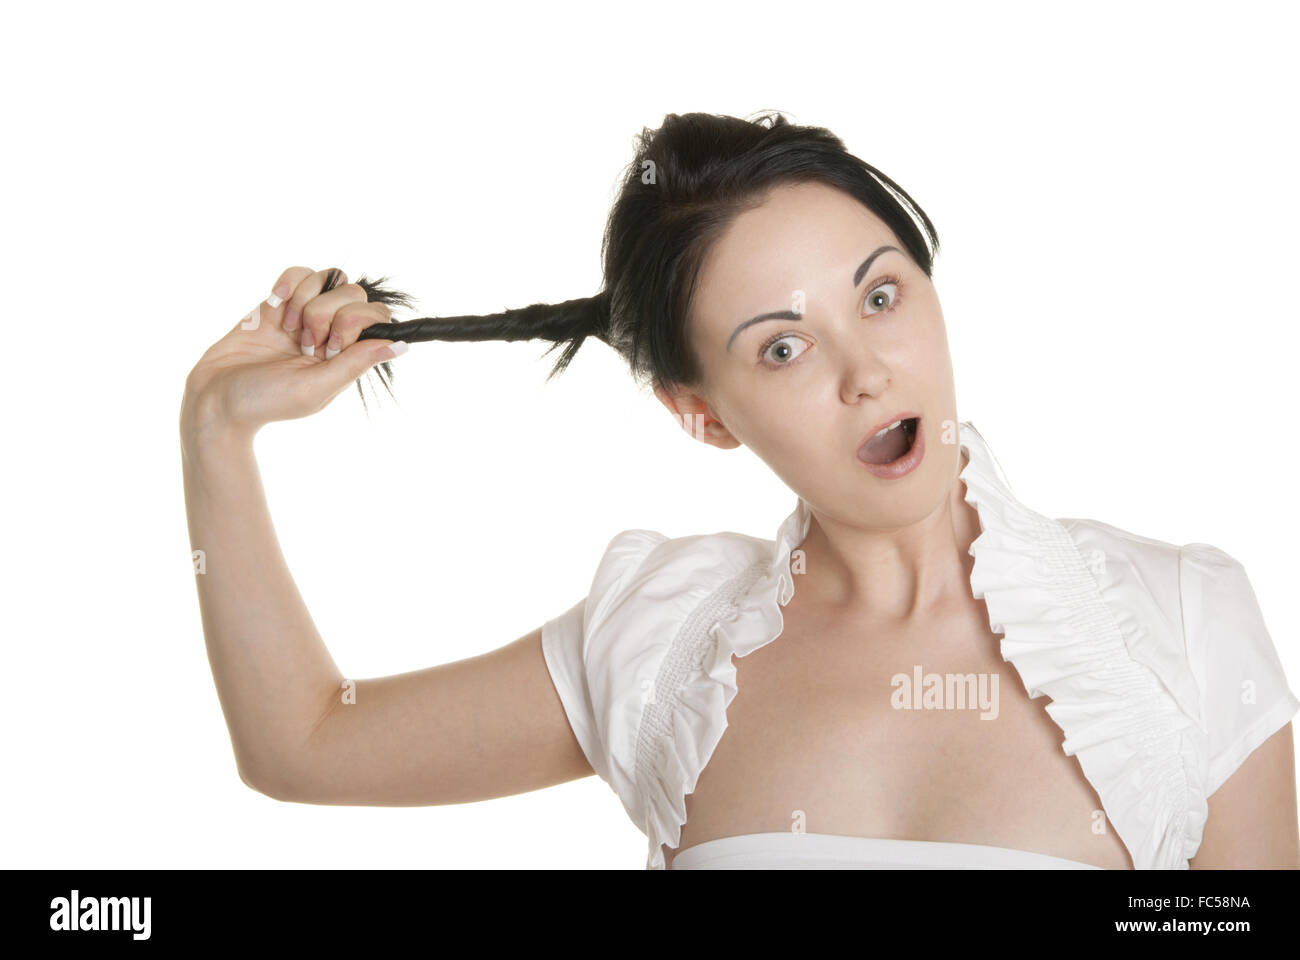 Young woman pulls itself for plait Stock Photo